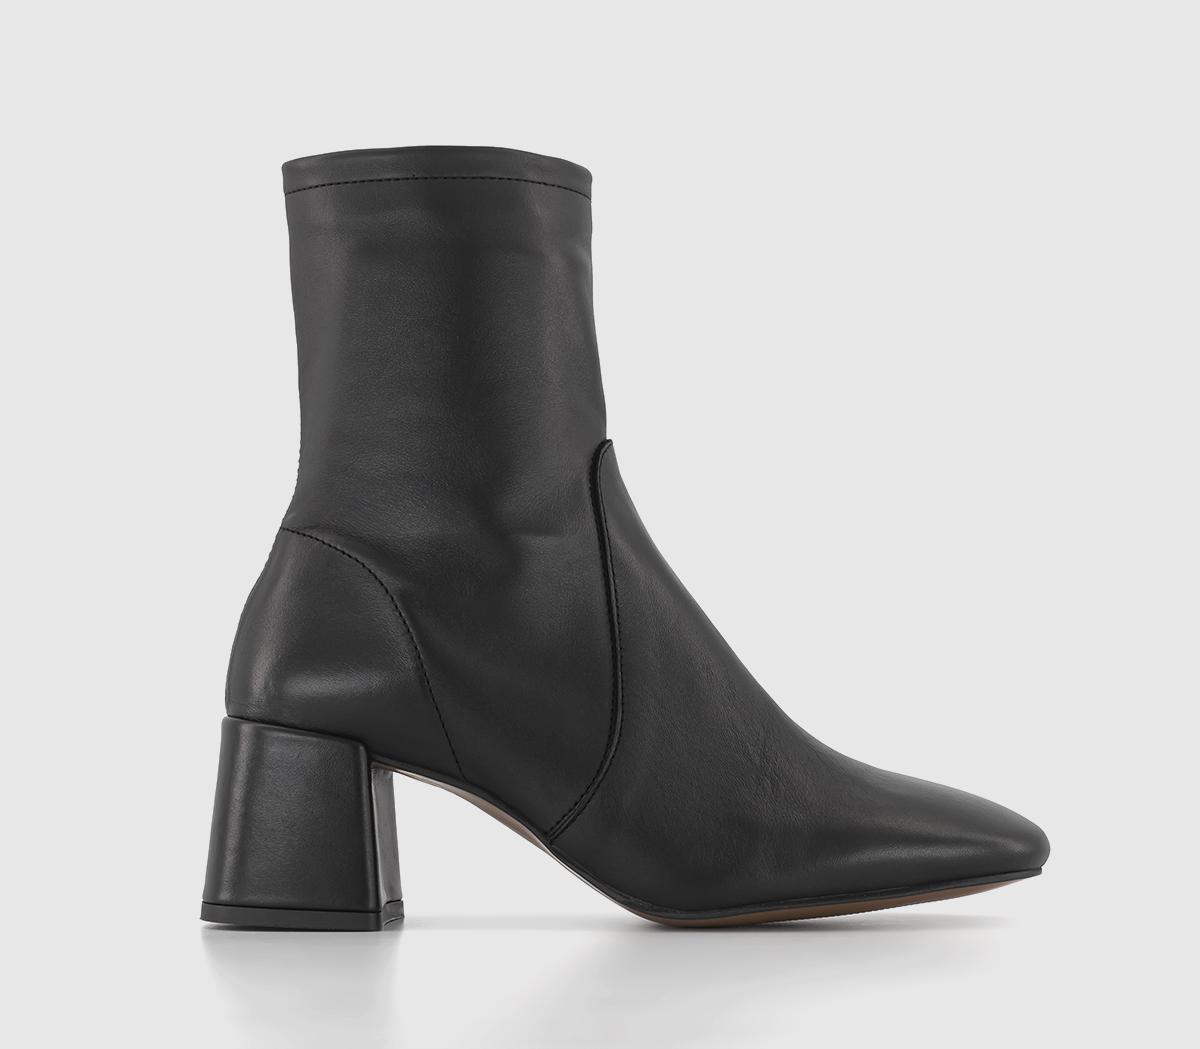 OFFICE Alexis Unlined Heeled Ankle Boots Black Leather - Women's Ankle ...